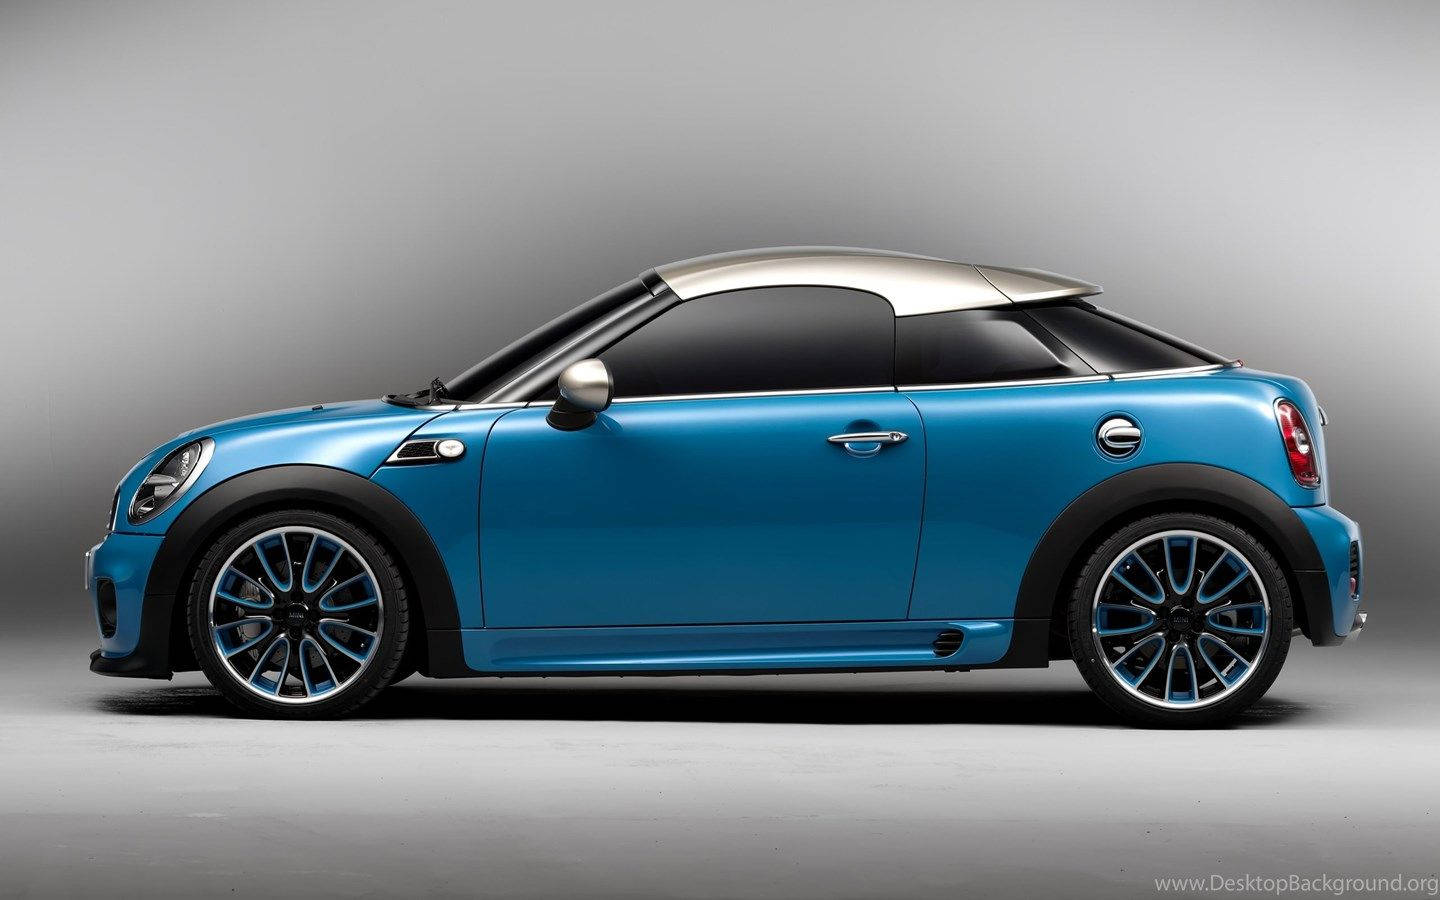 Caption: Standout Blue Mini Cooper in High Definition Wallpaper